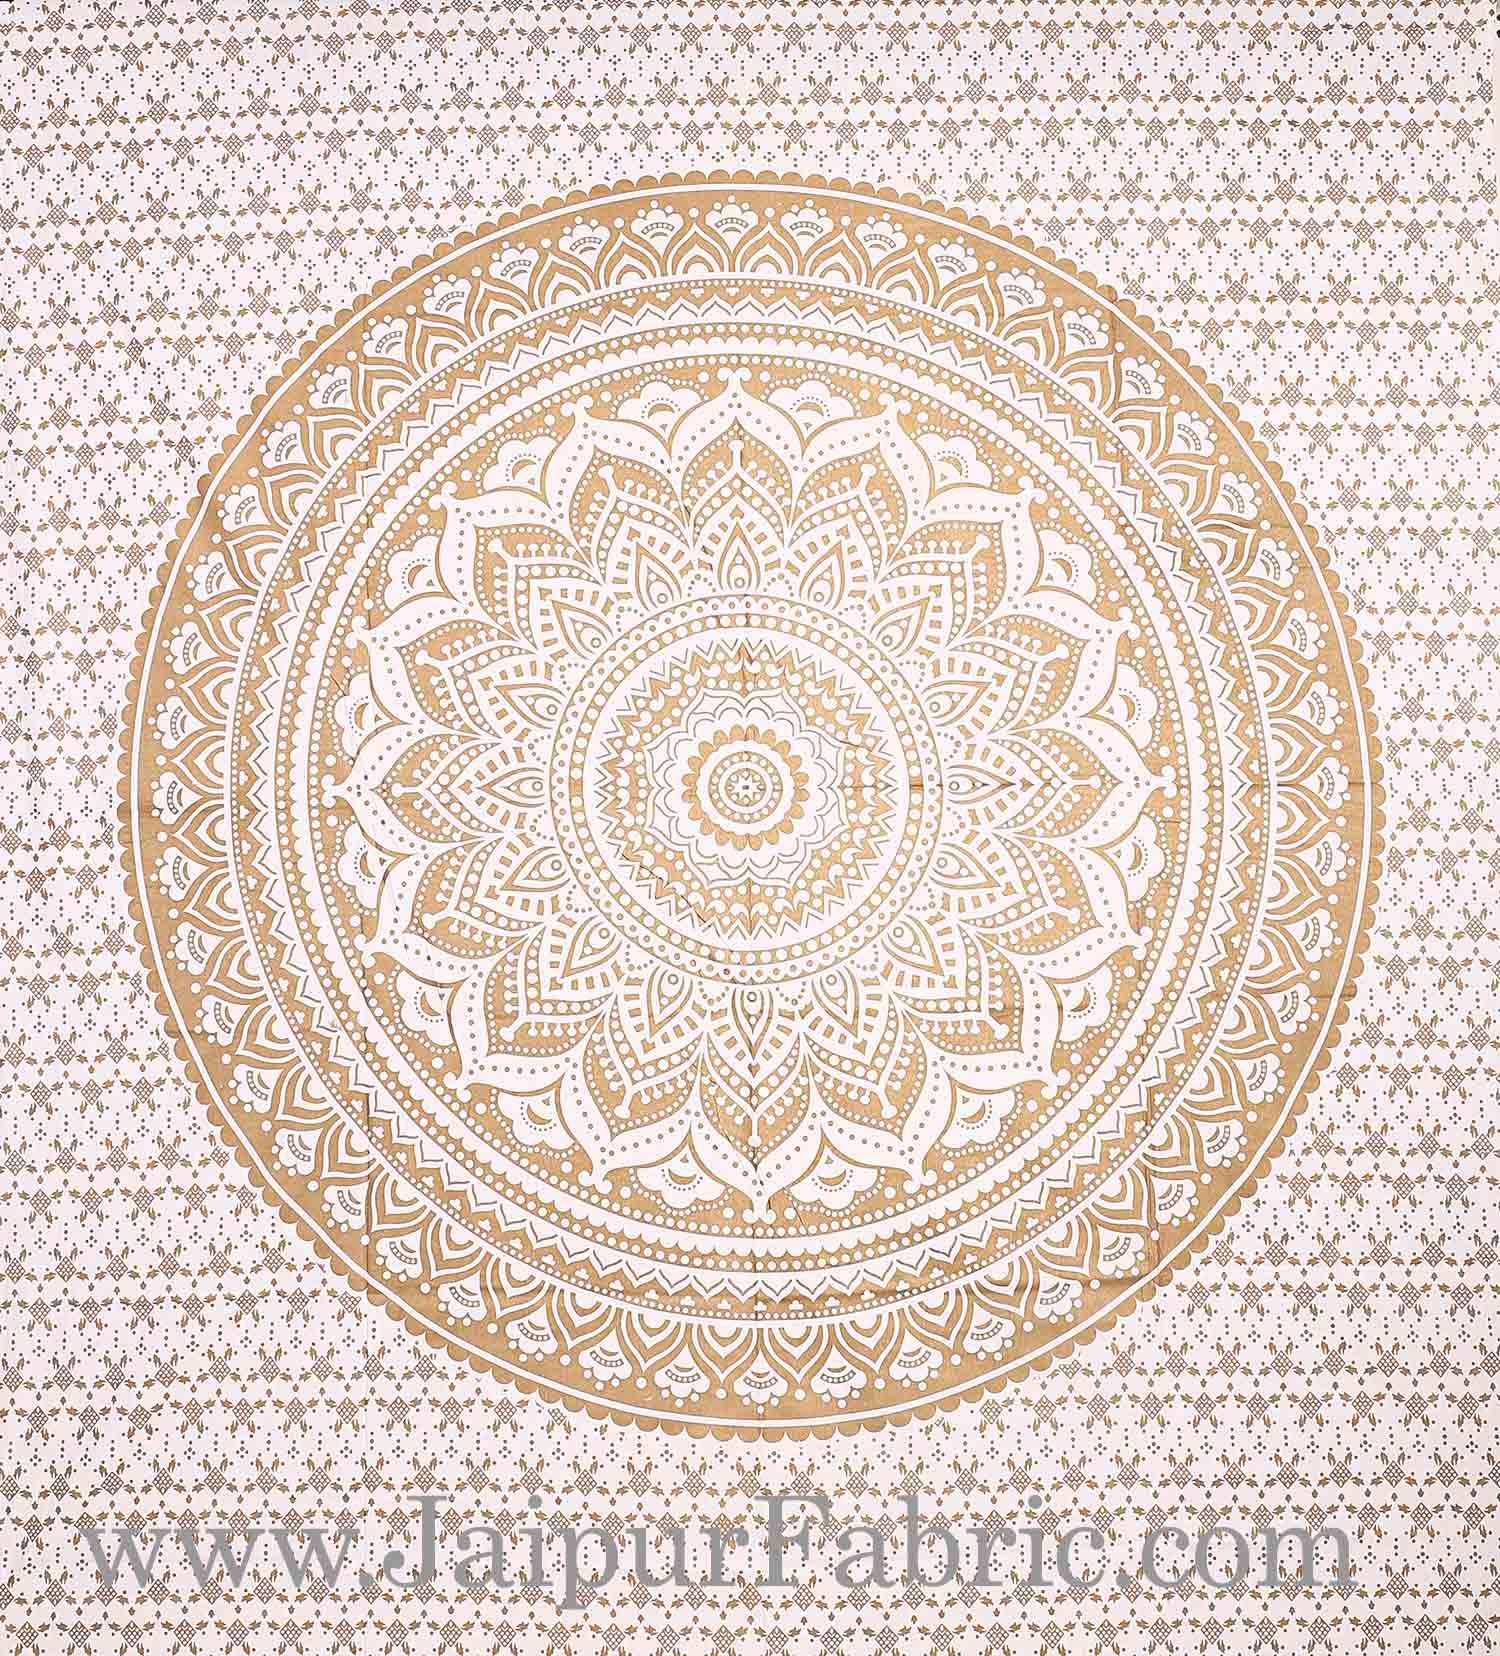 Gold Tapestry Ombre Mandala Wall Hanging Metallic Shine Bohemian Bedspread and beach throw 95x85